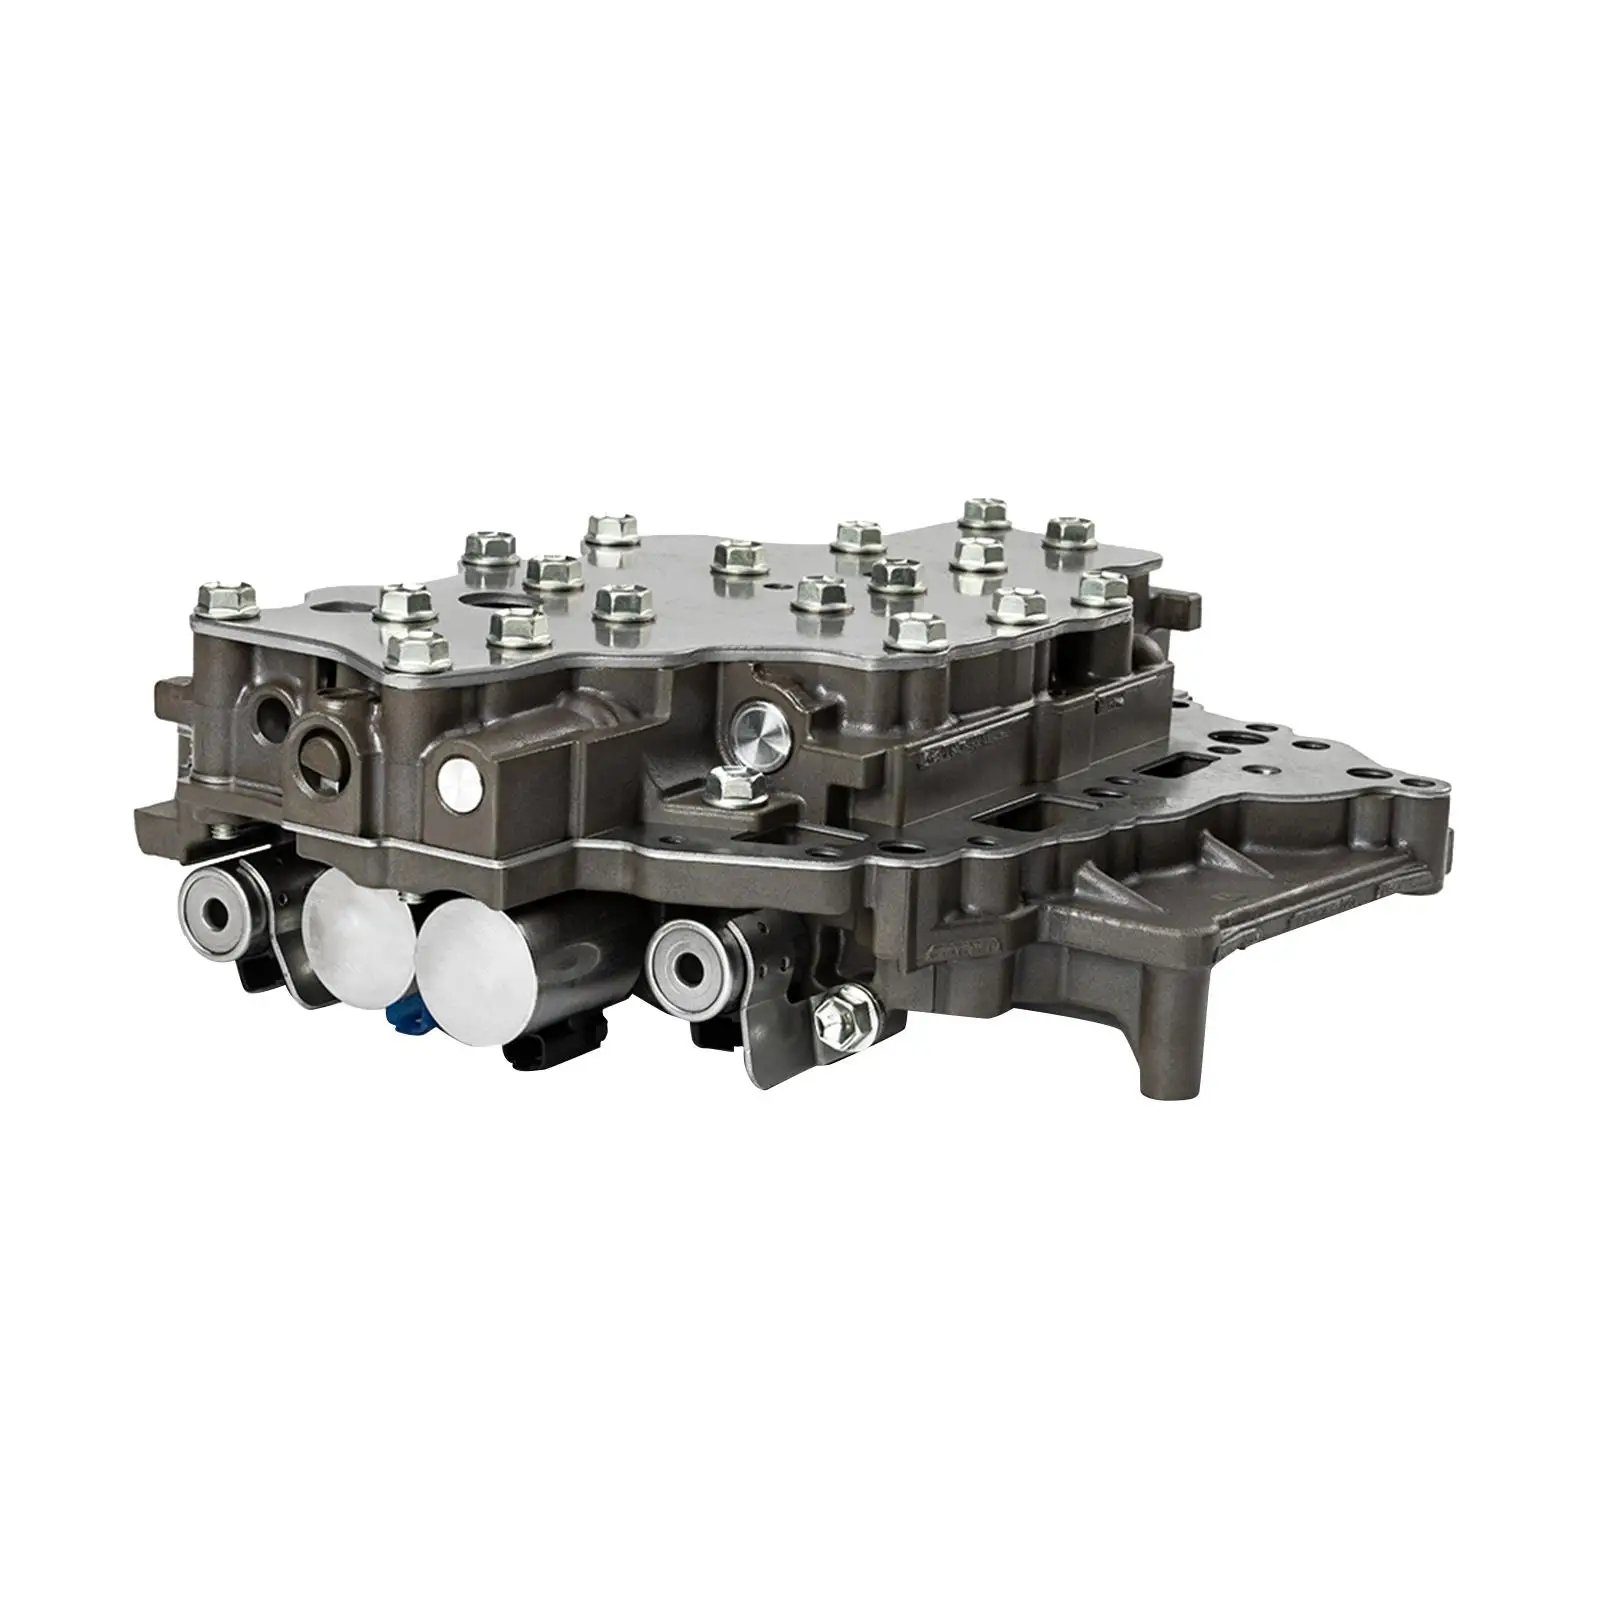 Automatic Transmission Gearbox Valve Body K310 for  Corolla1.6L 1.8L Ractis15 to - £395.04 GBP